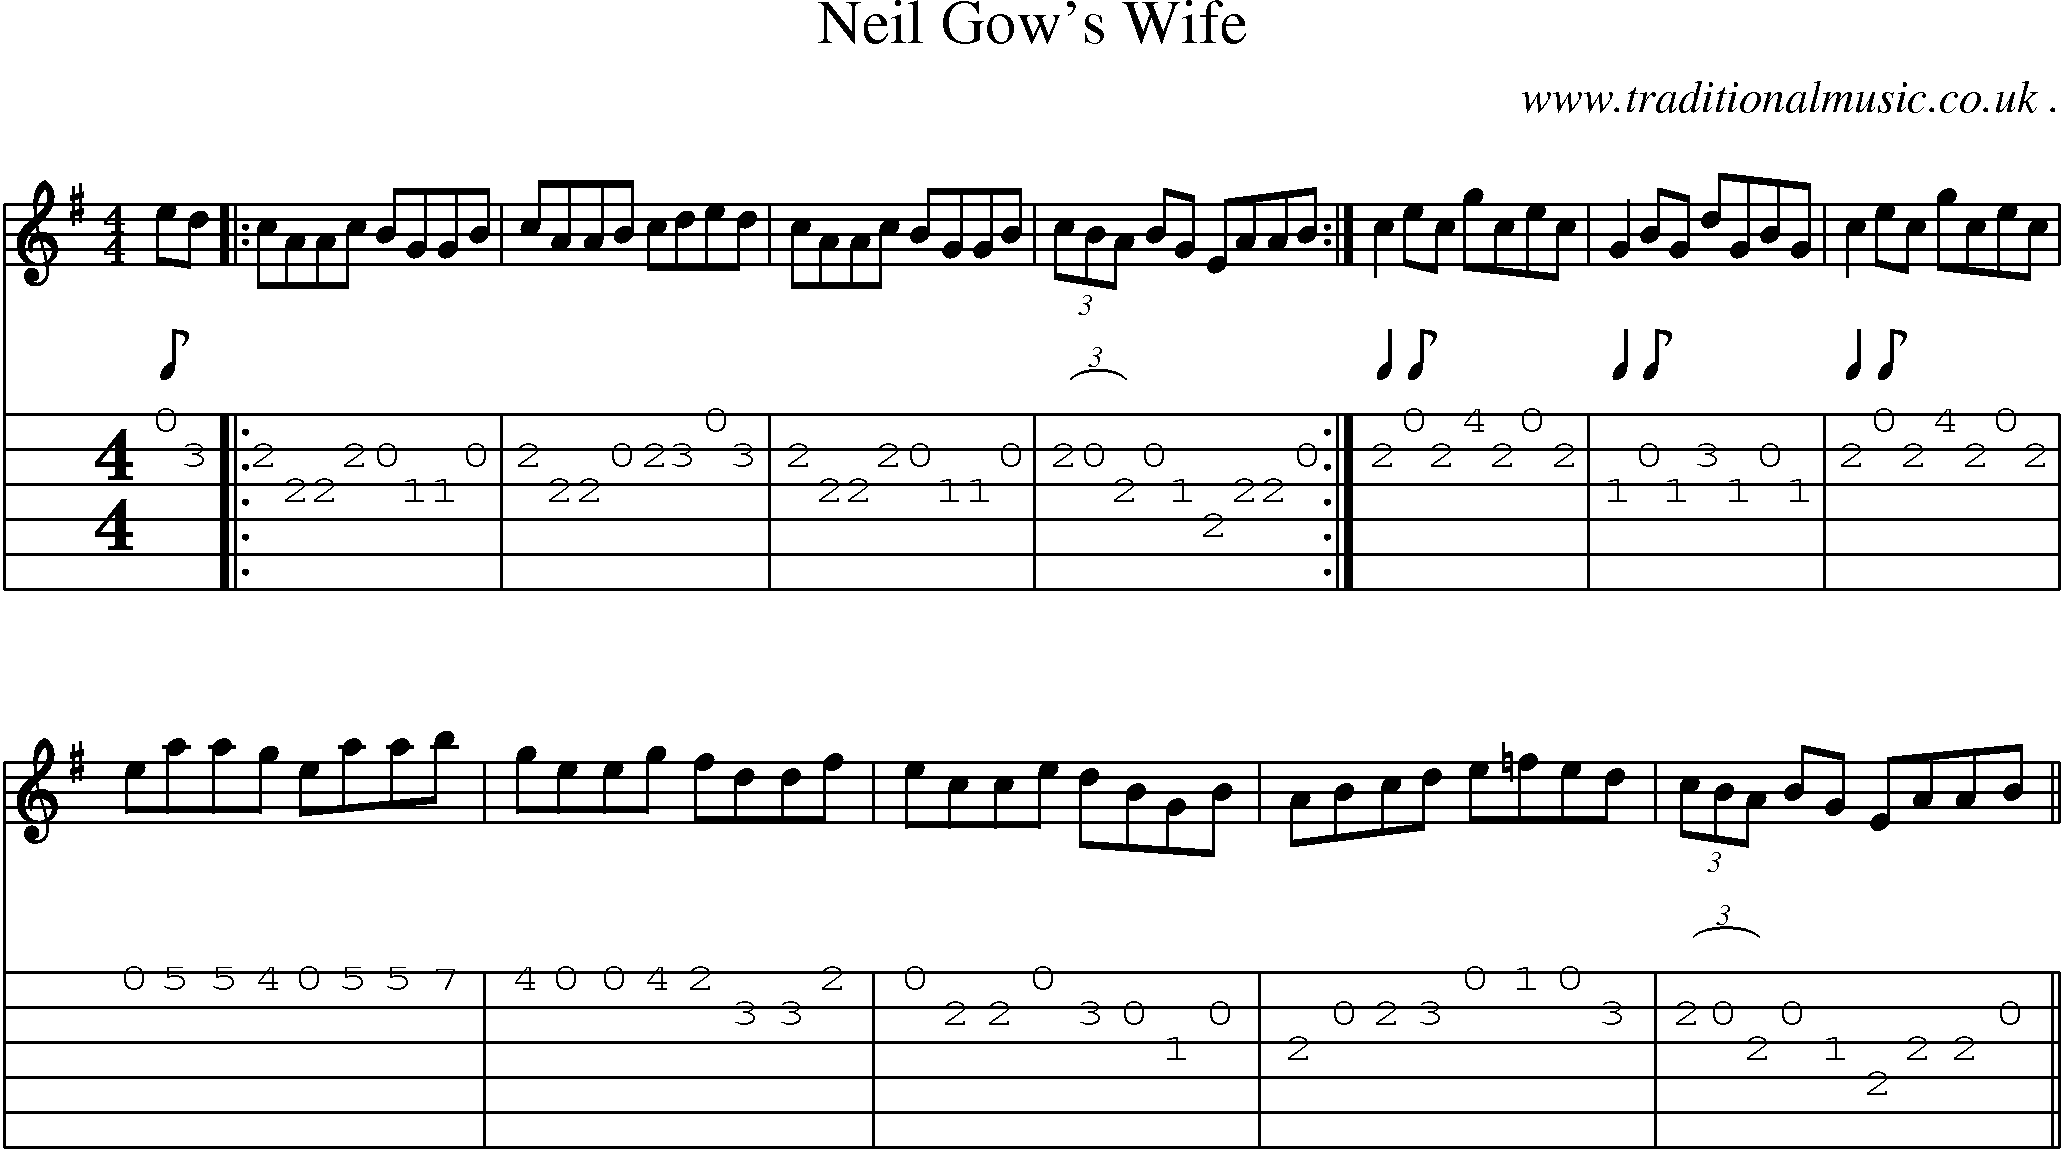 Sheet-Music and Guitar Tabs for Neil Gows Wife